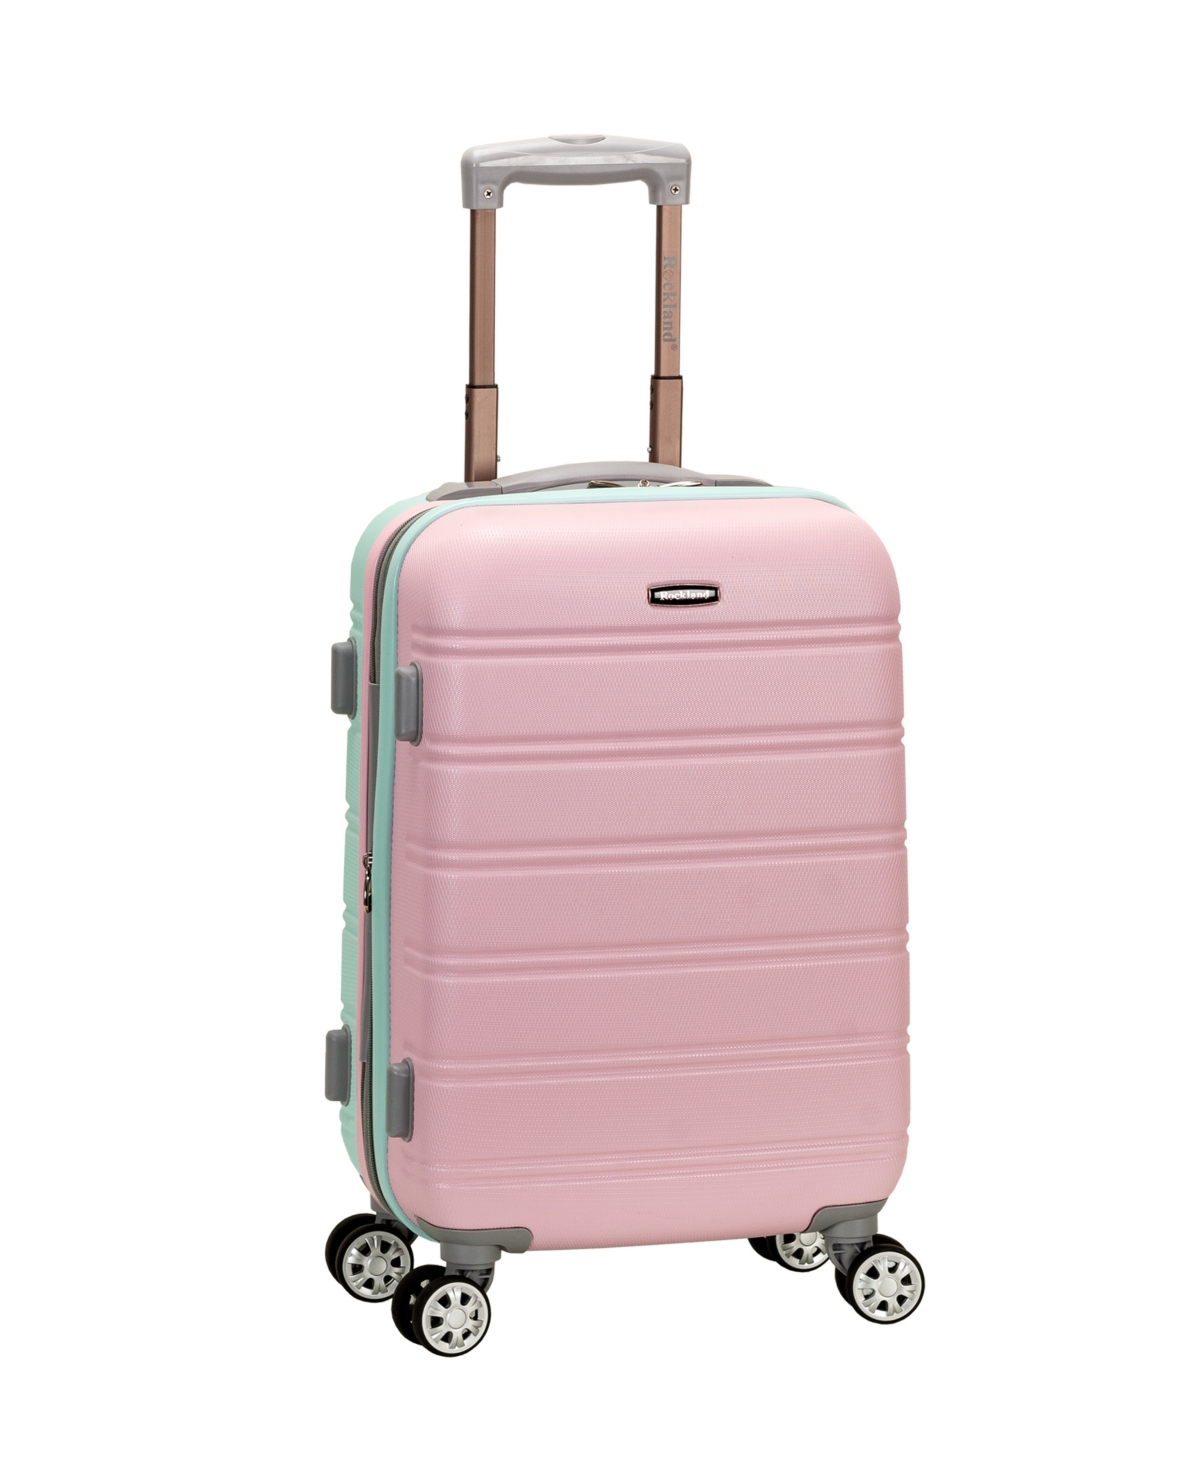 Rockland Melbourne 20" Hardside Carry-on Spinner In Two-toned Pink  Mint